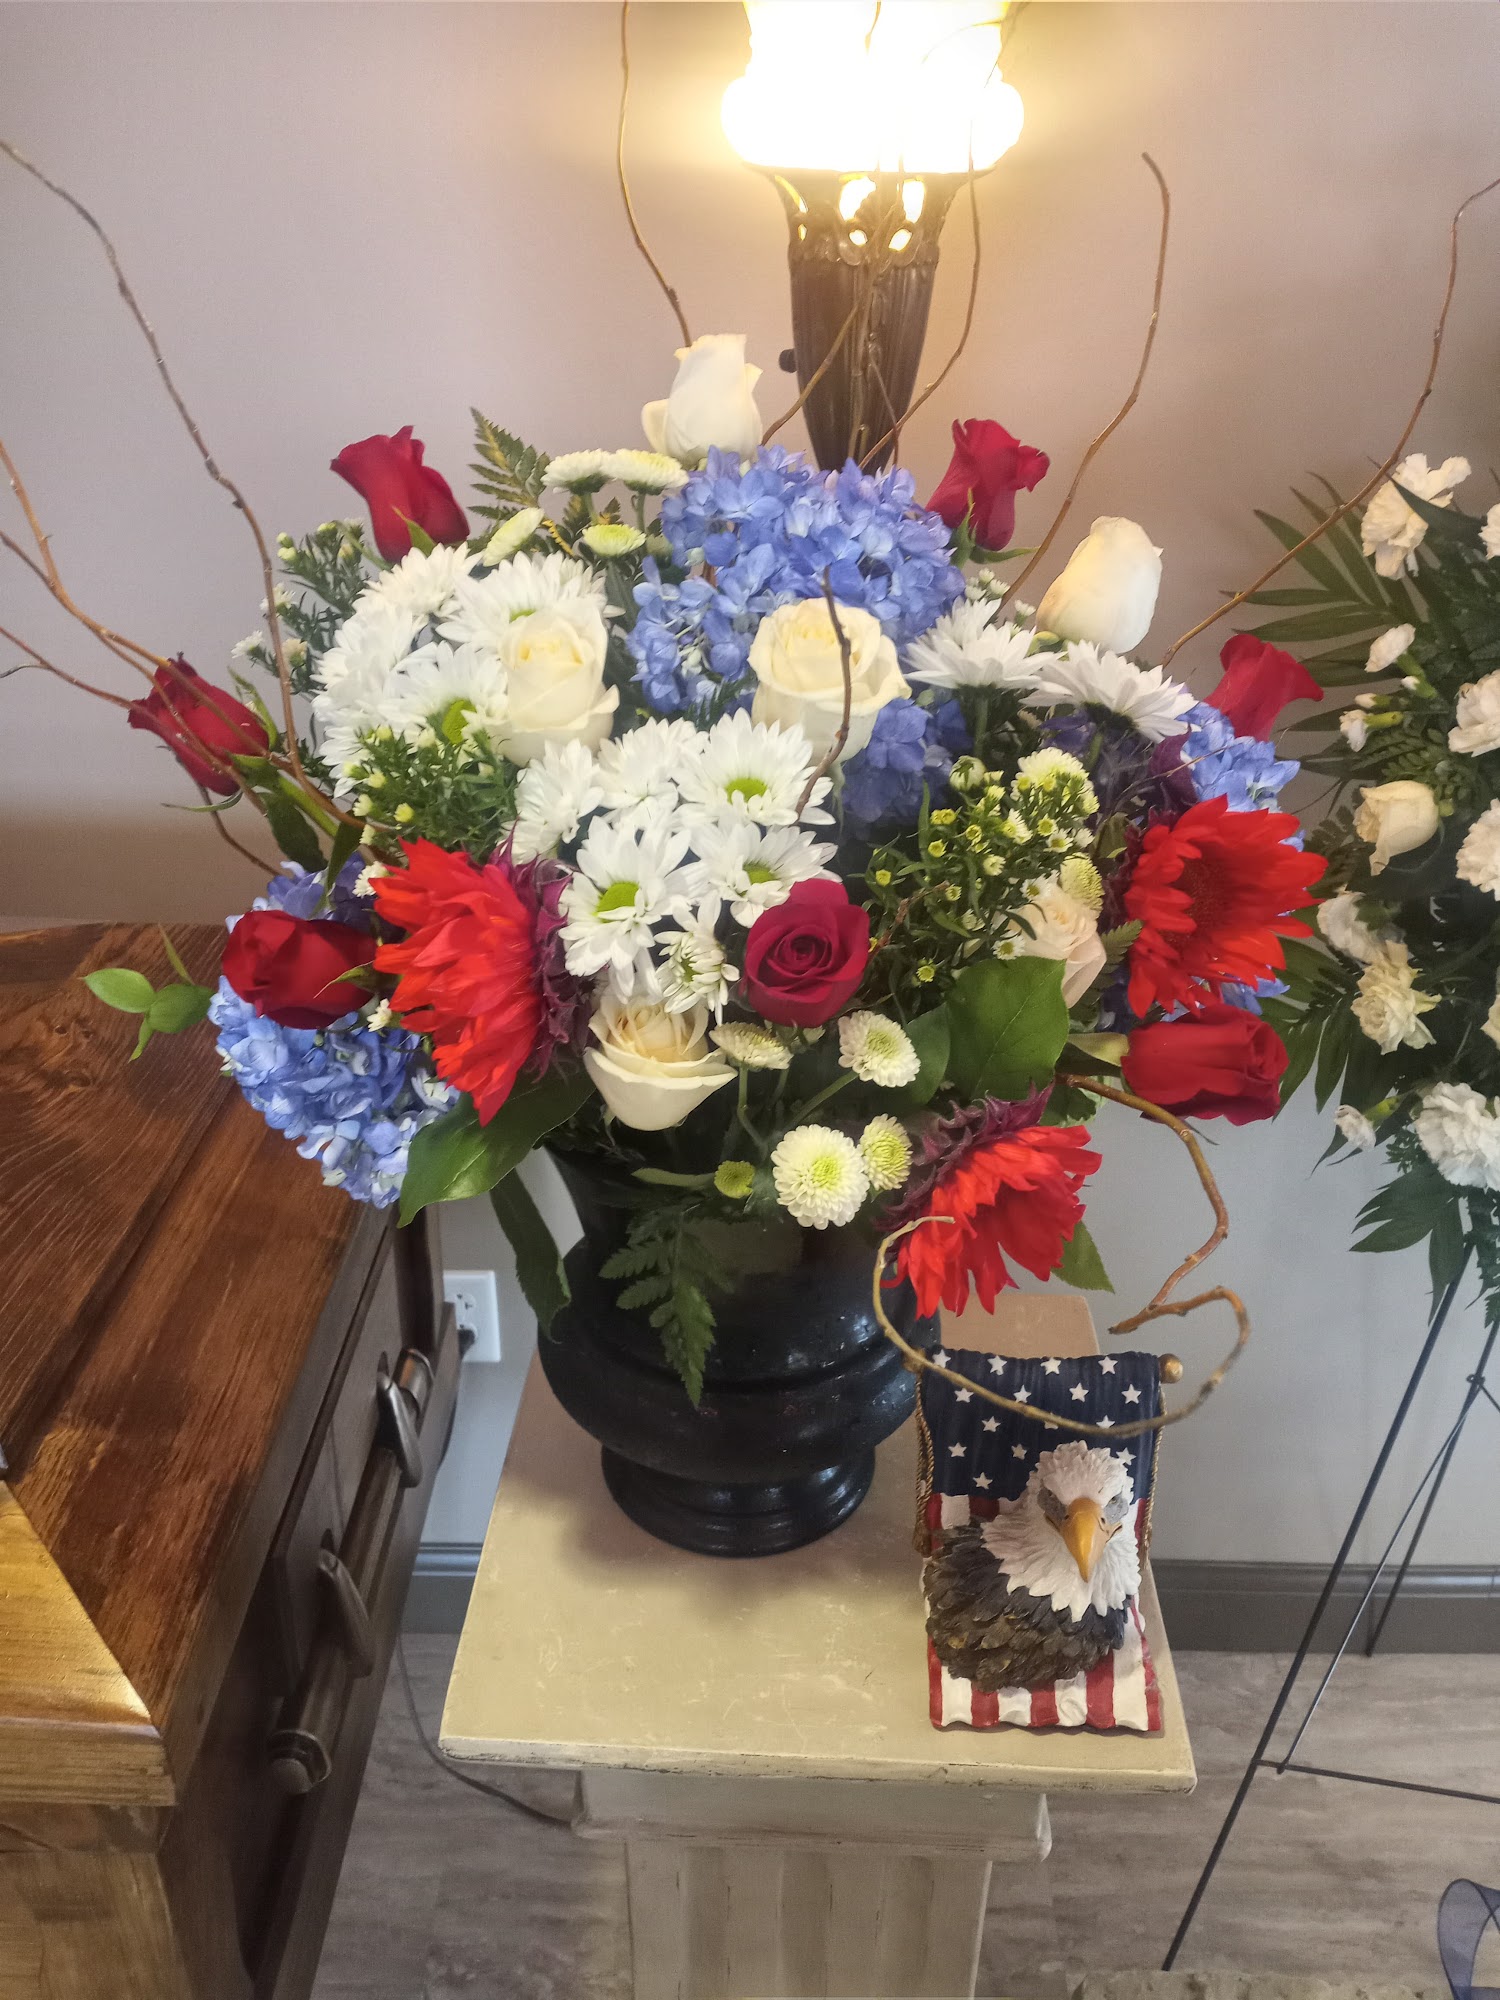 Waterman's Floral Gift Shop & Floral Designs 203 Edwardsville Rd, Troy Illinois 62294